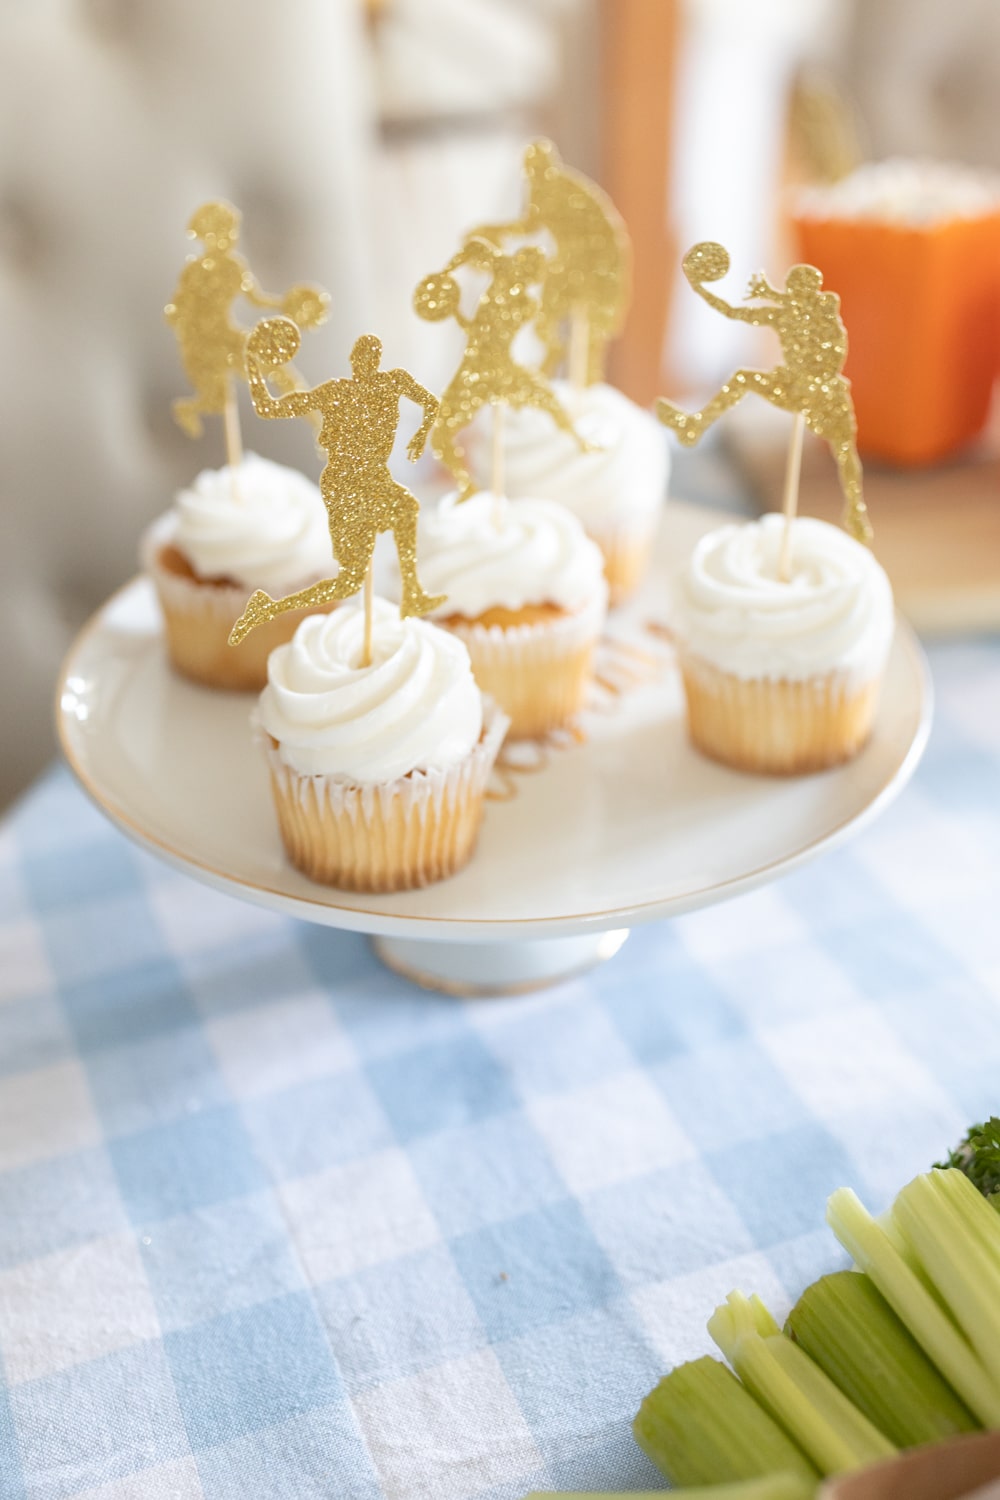 Blogger Stephanie Ziajka shares DIY basketball cupcake toppers in a round-up of basketball themed party ideas on Diary of a Debutante